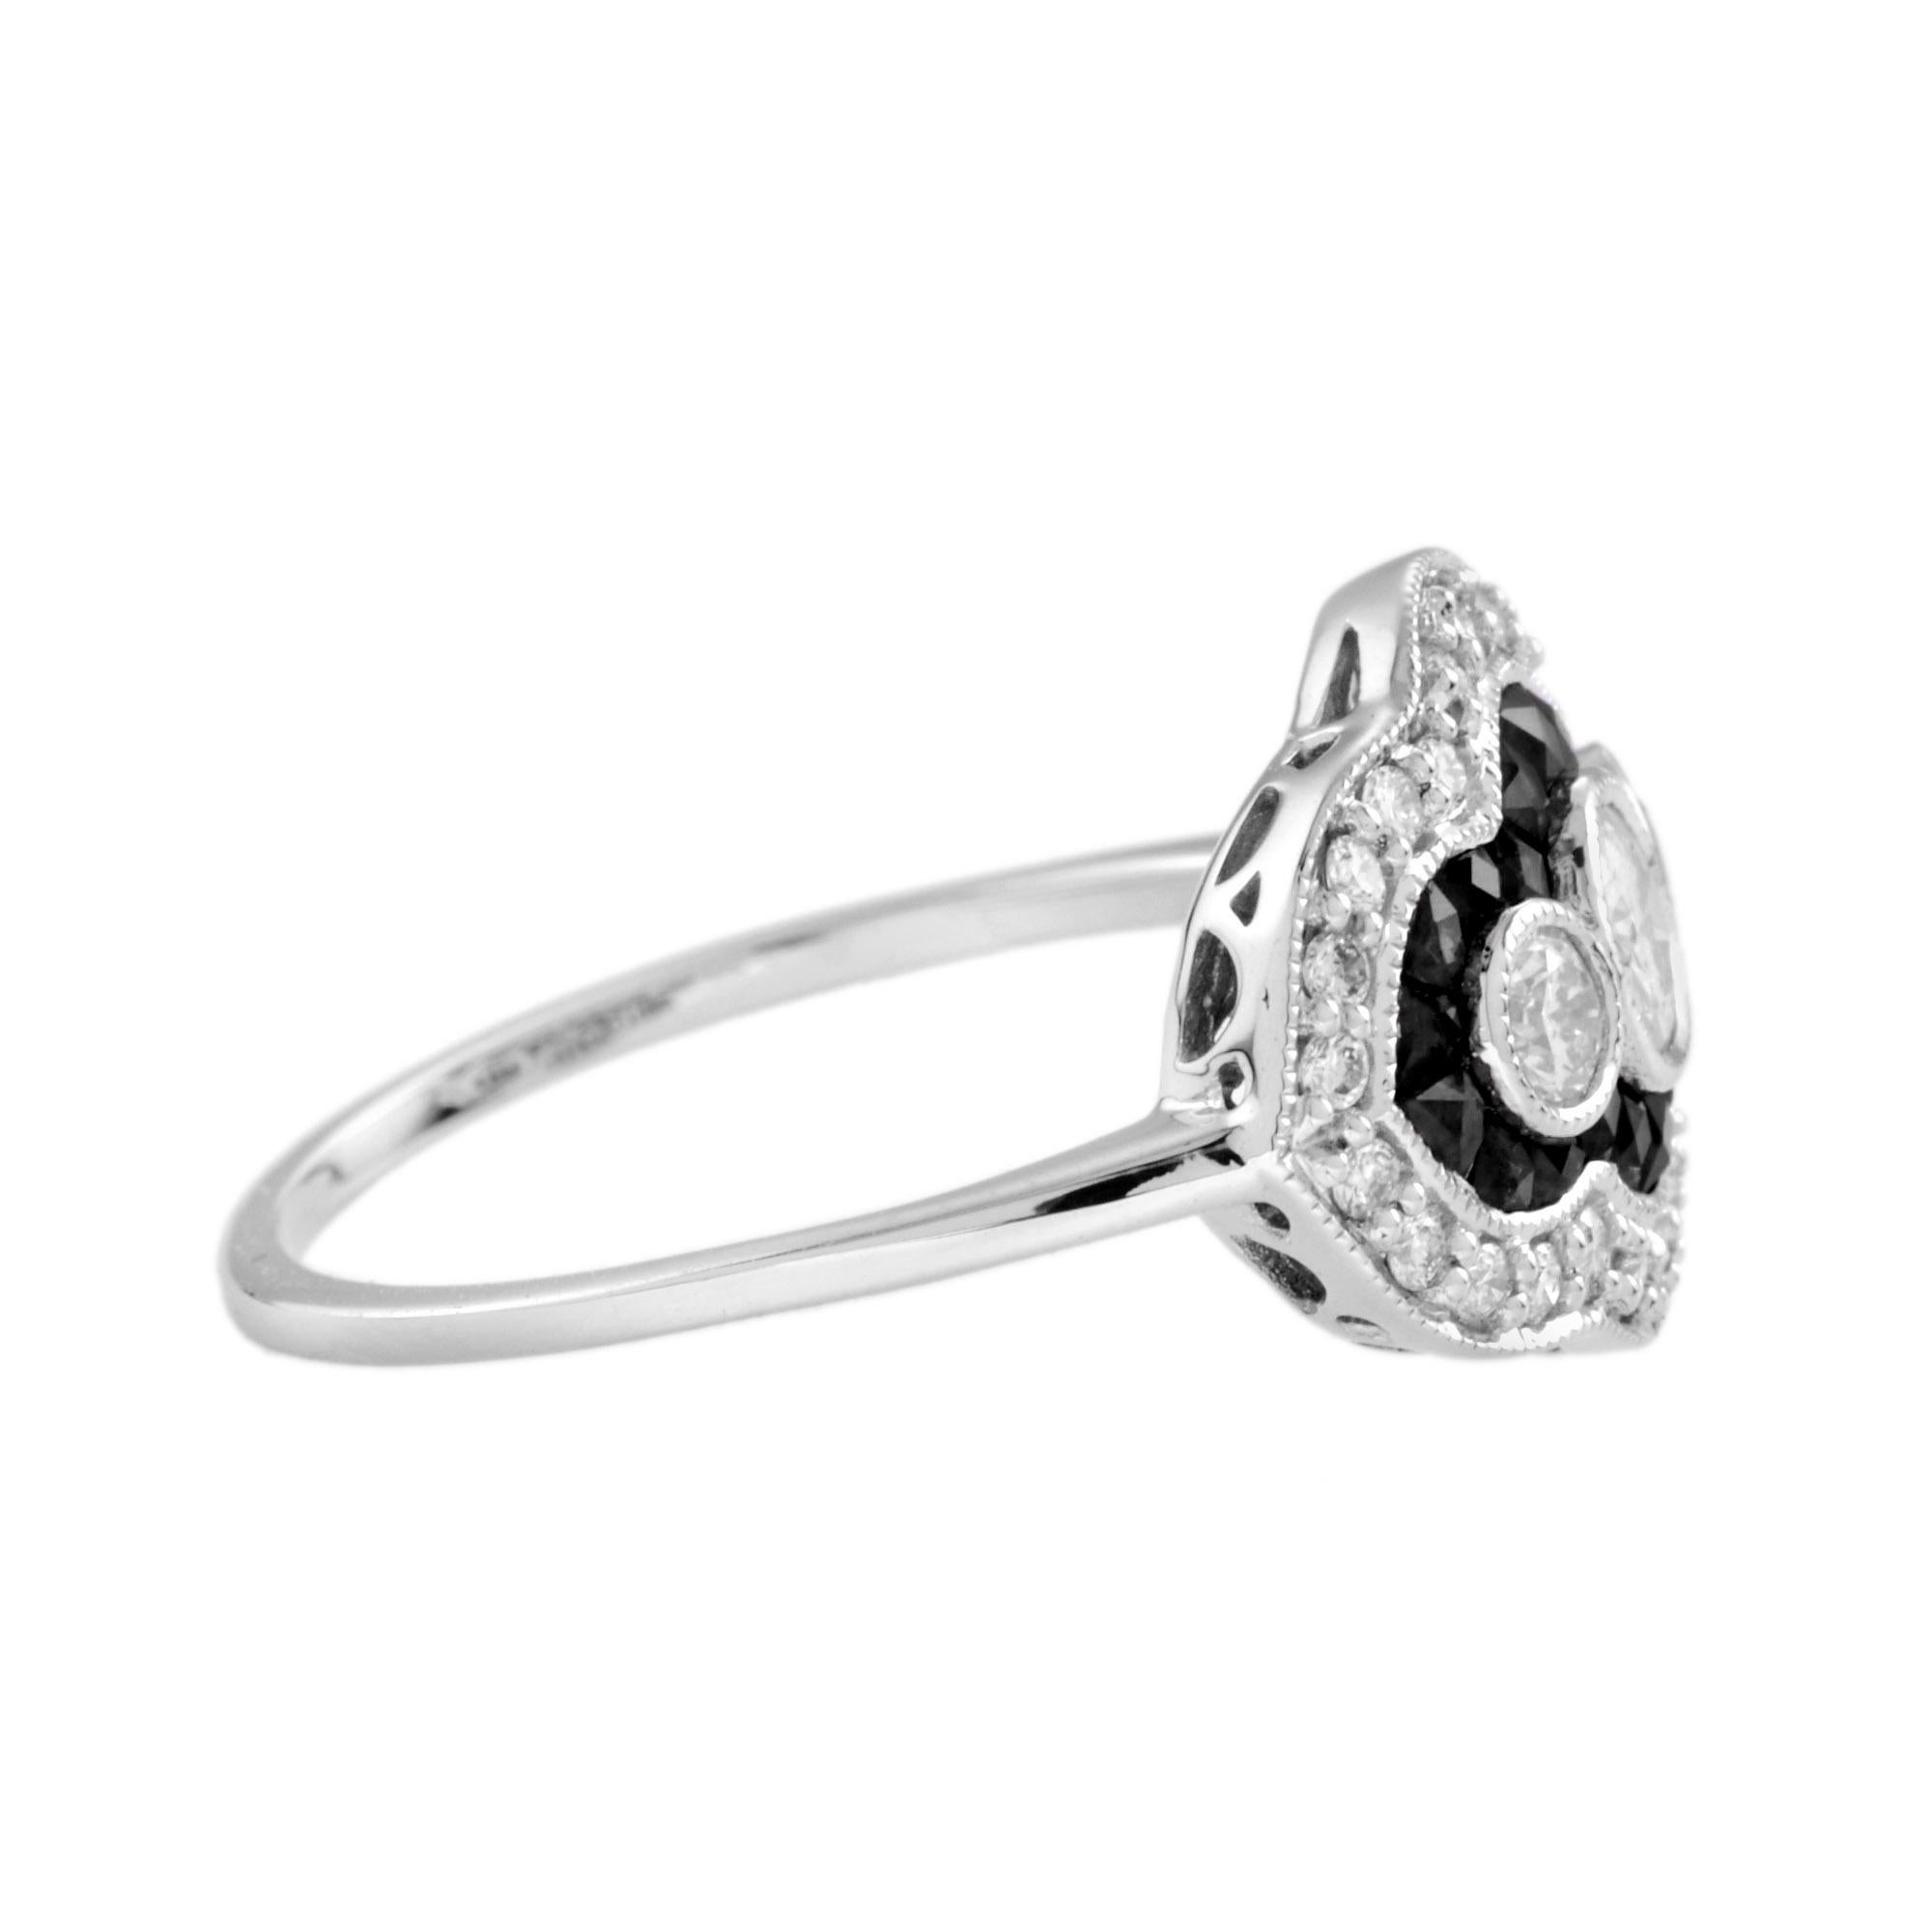 For Sale:  Diamond and Onyx Art Deco Style Three Stone Ring in 14K White Gold 4